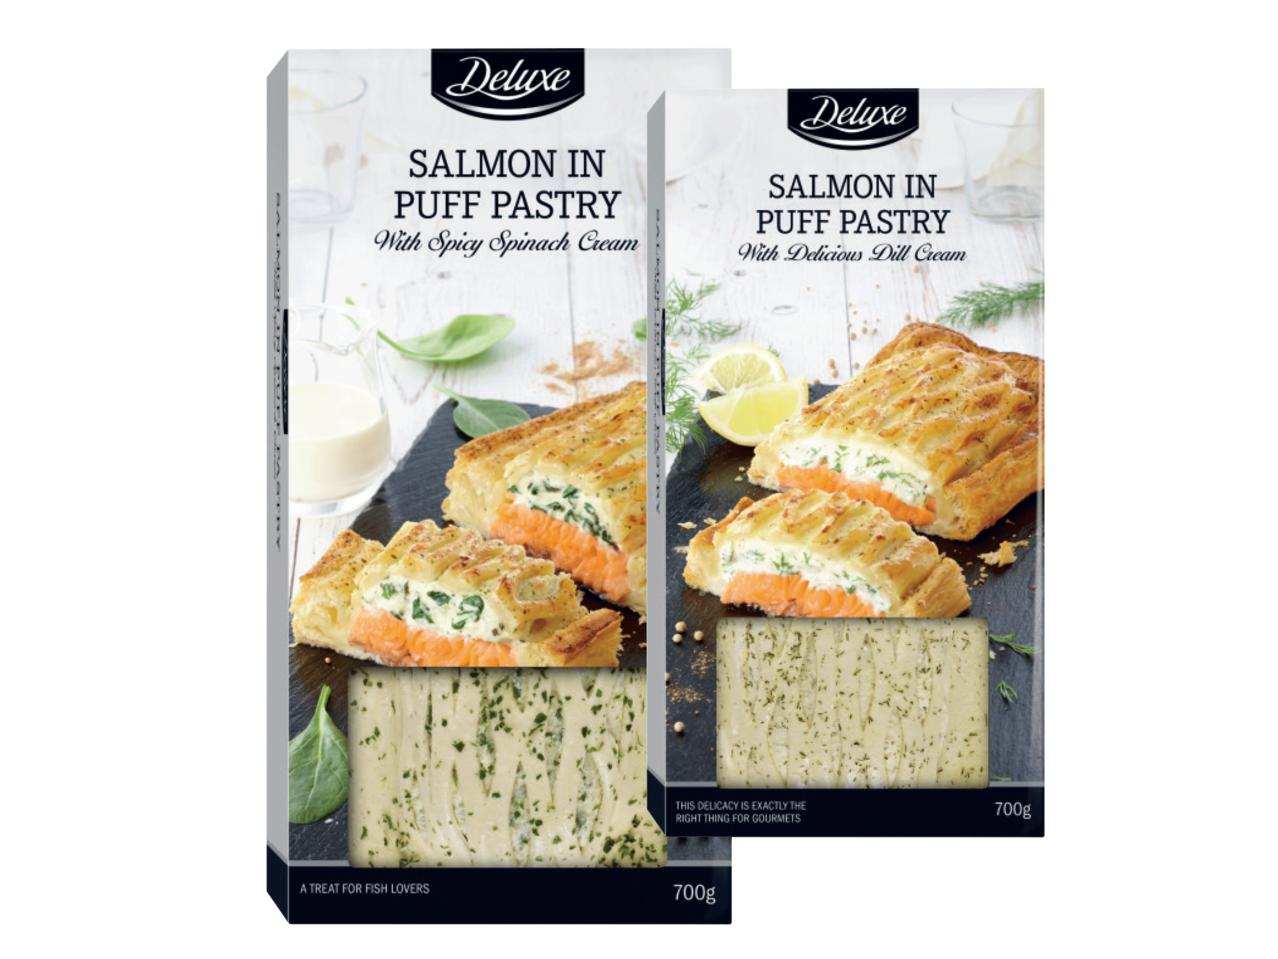 DELUXE Salmon in Puff Pastry